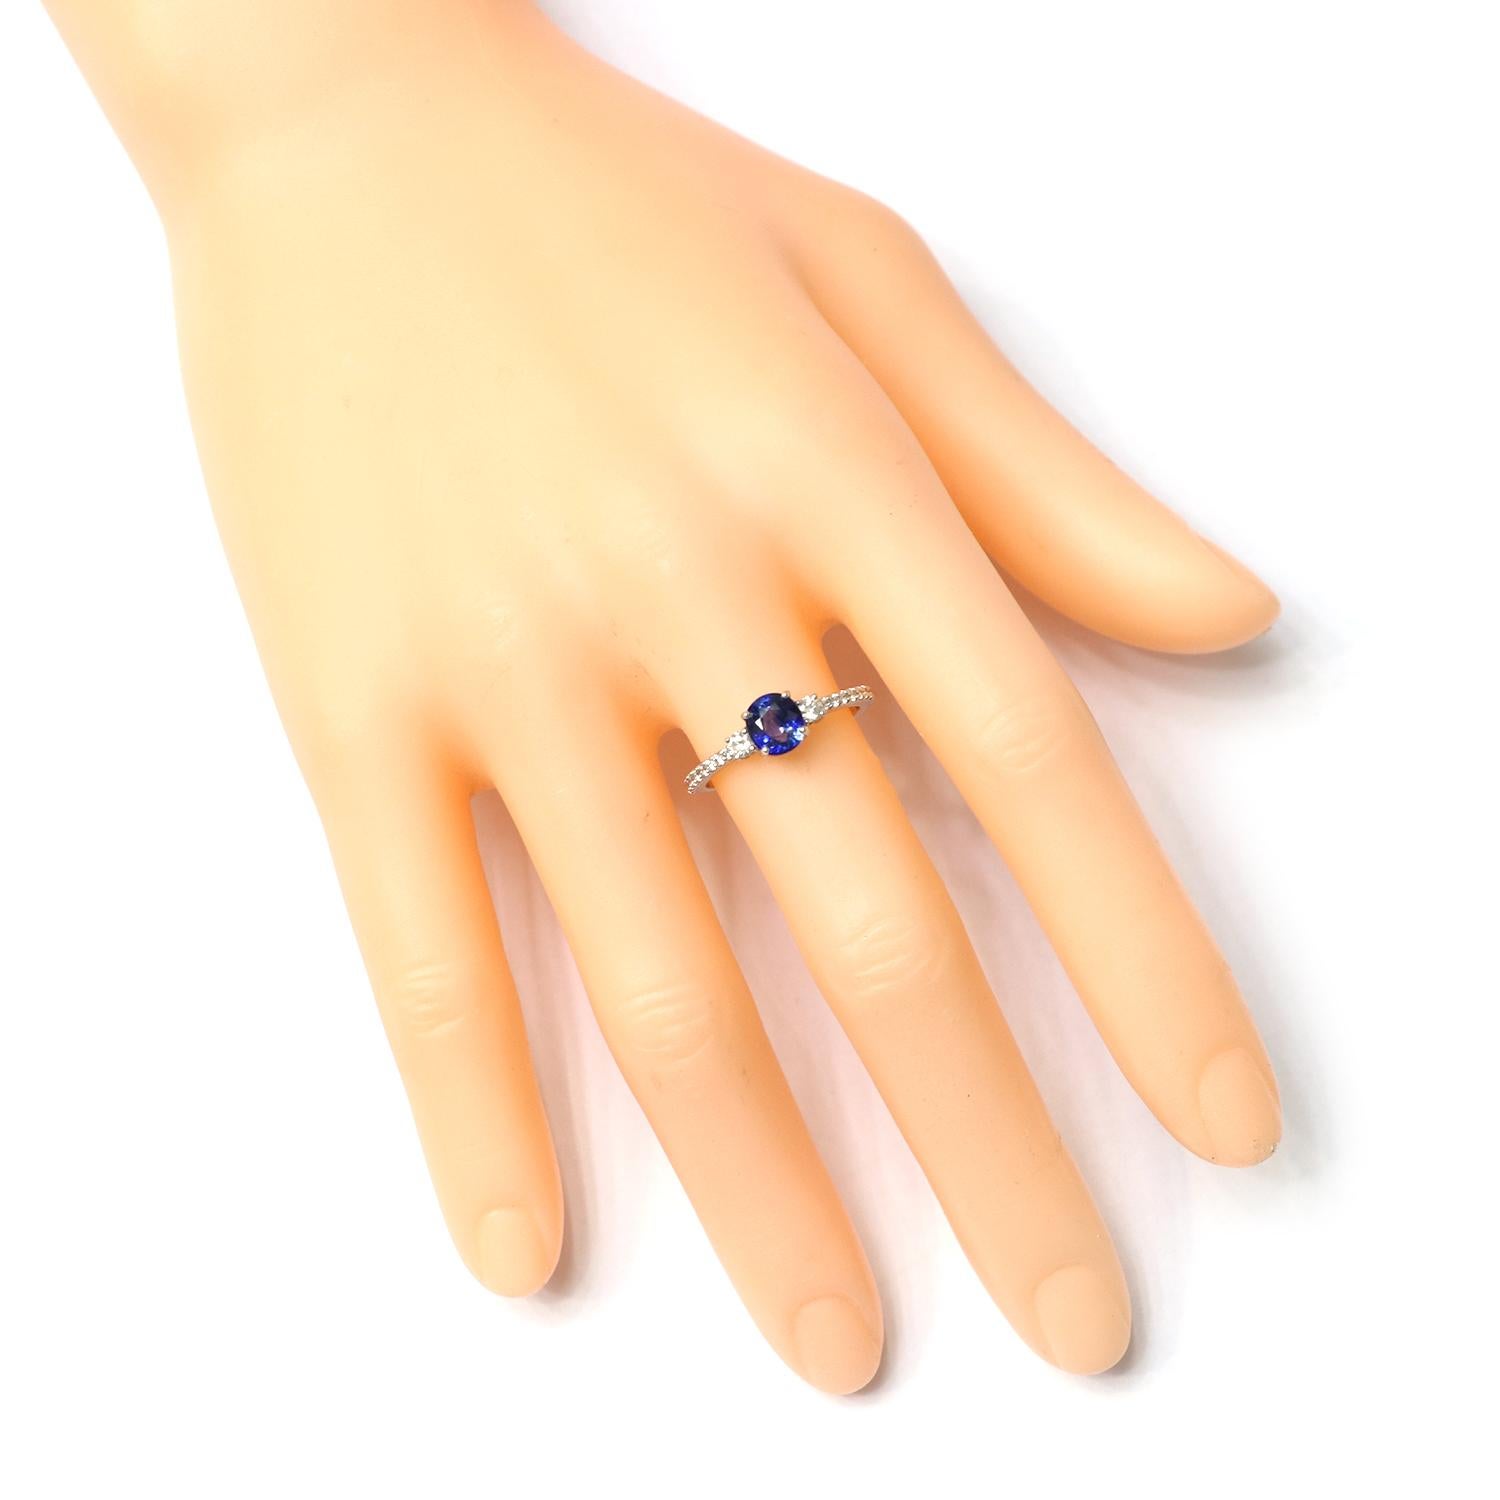 18 Karat White Gold 1.74 Carat Sapphire and Diamond Solitaire Ring 

Timeless, elegant, and magnificent, this trinity ring features an organic silhouette, the design emulates subtle eminence. The glamourous ring features a Round-cut Sapphire